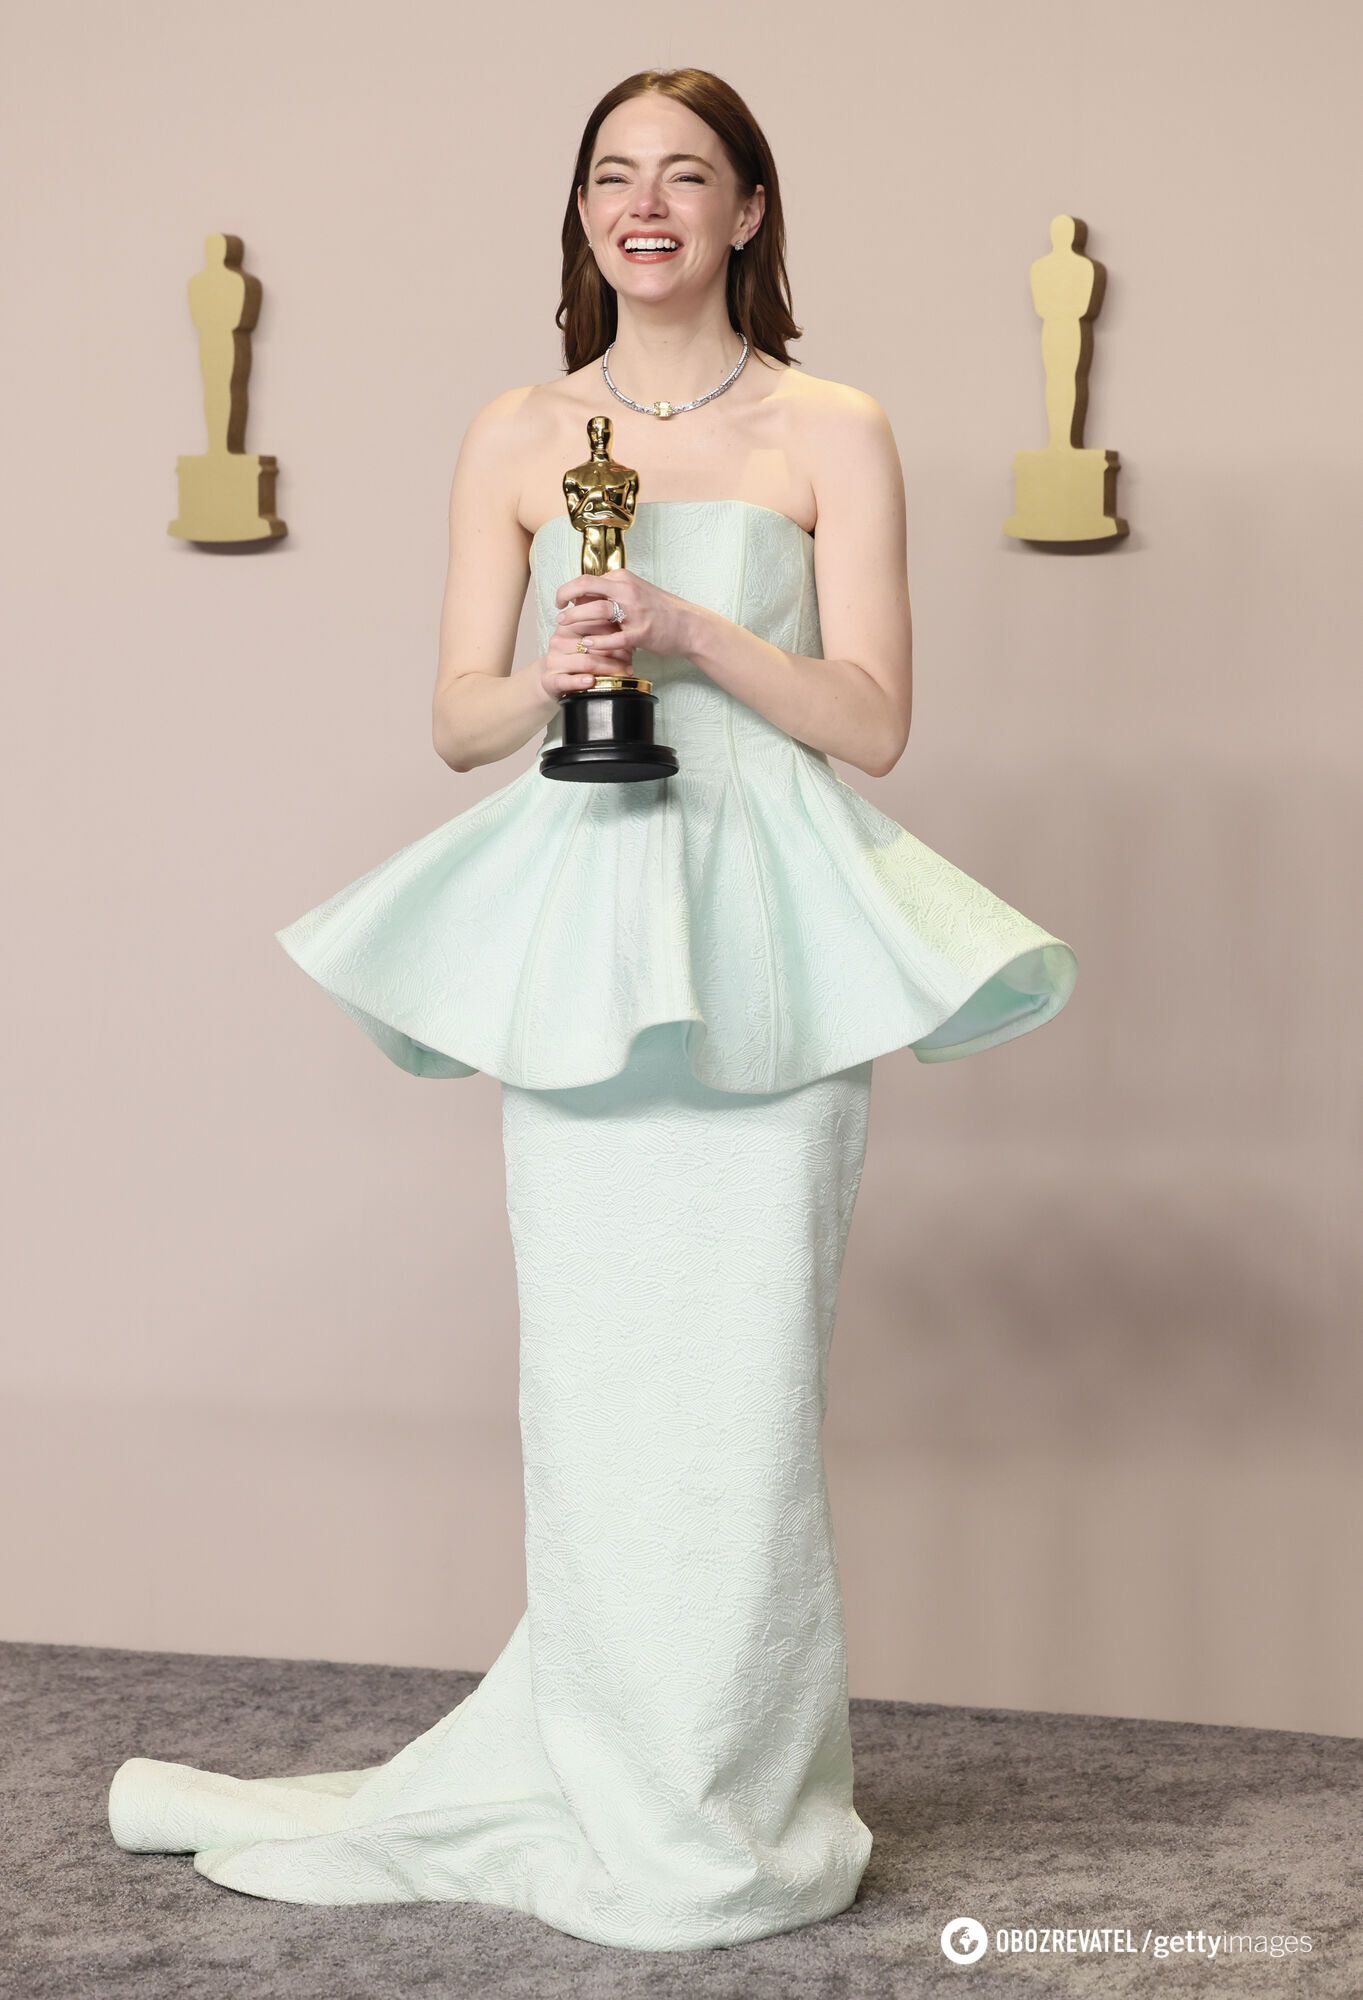 Ryan Gosling had nothing to do with it. Emma Stone, whose dress broke at the Oscars 2024, revealed the truth about the embarrassment